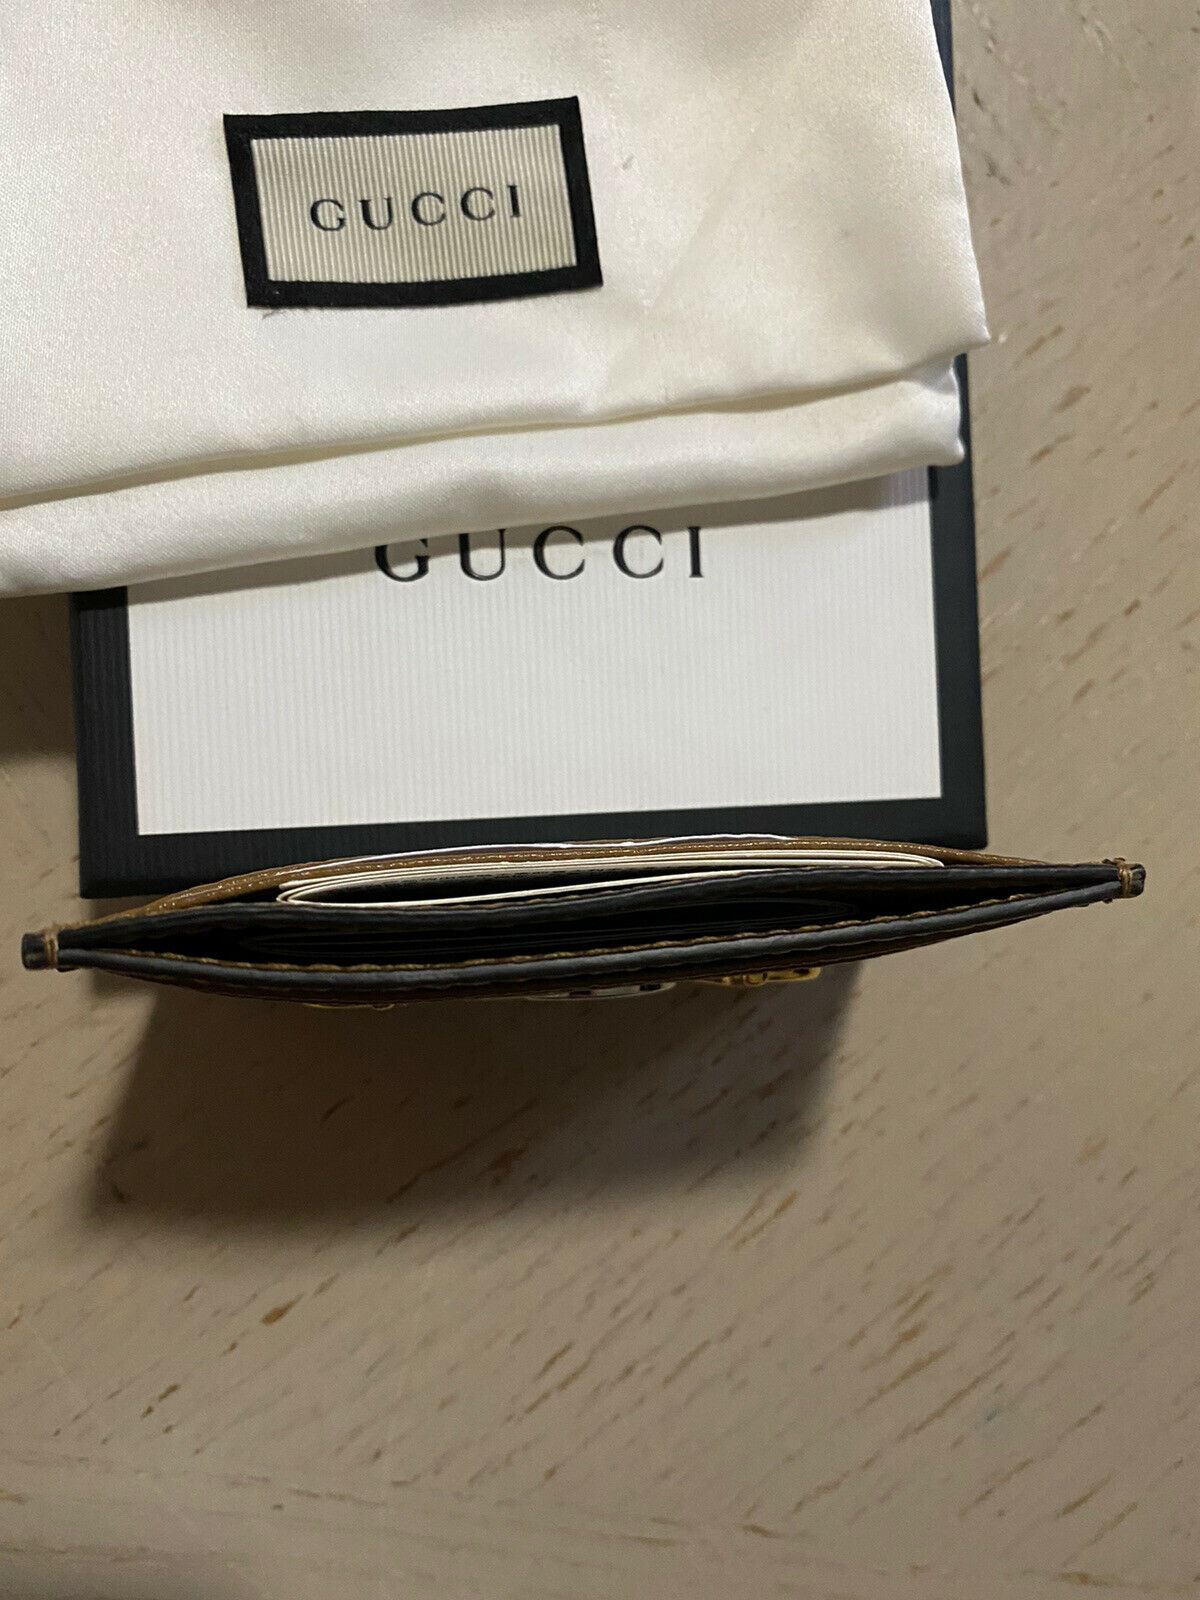 New Gucci Men’s Small Wallet Cart Holder GG Monogram Brown Italy